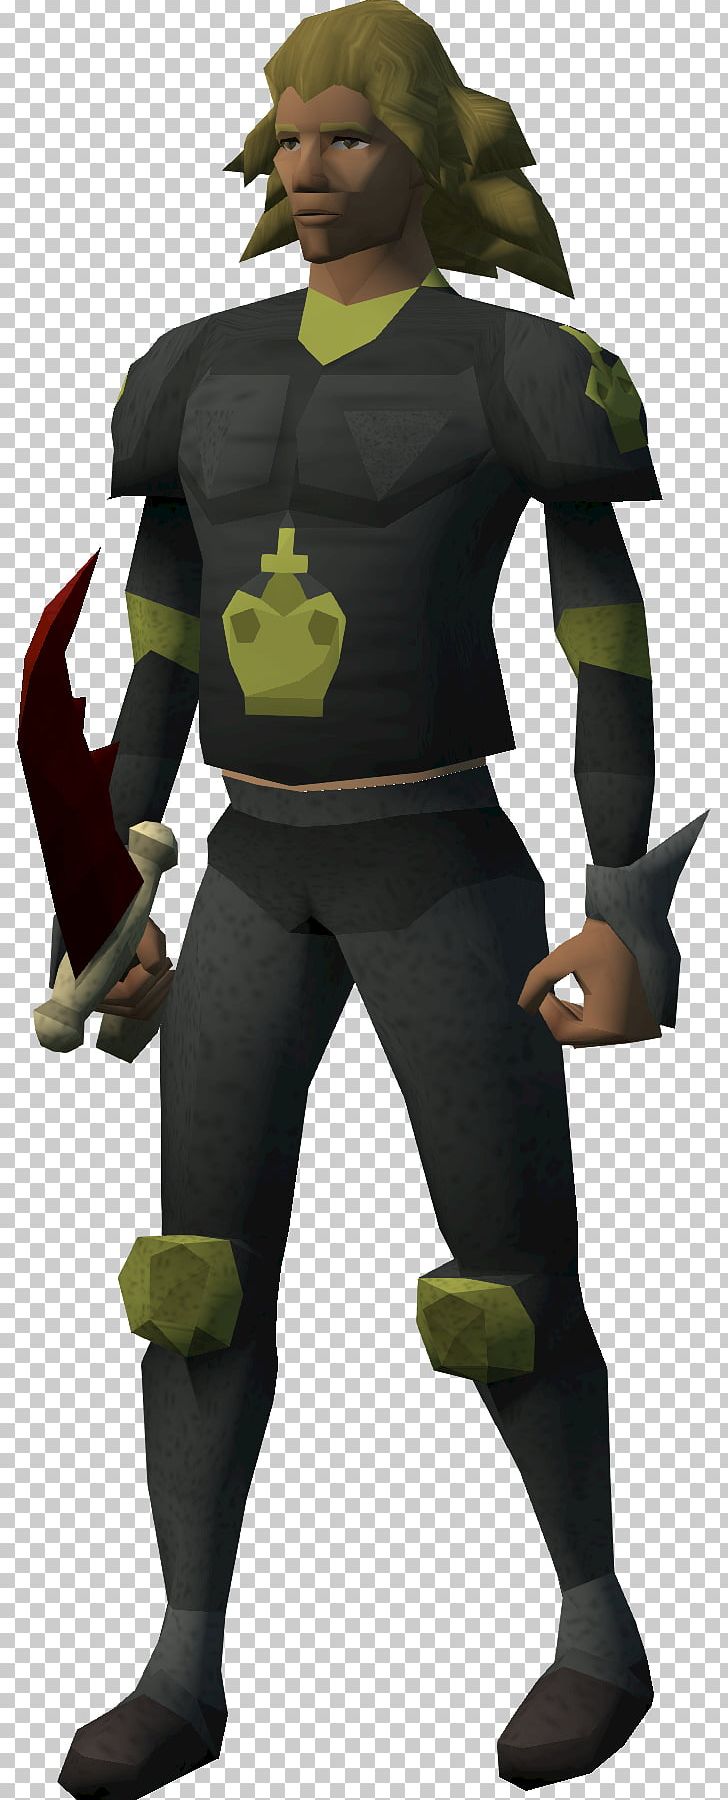 RuneScape Koschei He-Man Prince King PNG, Clipart, Character, Costume, Costume Design, Fiction, Fictional Character Free PNG Download